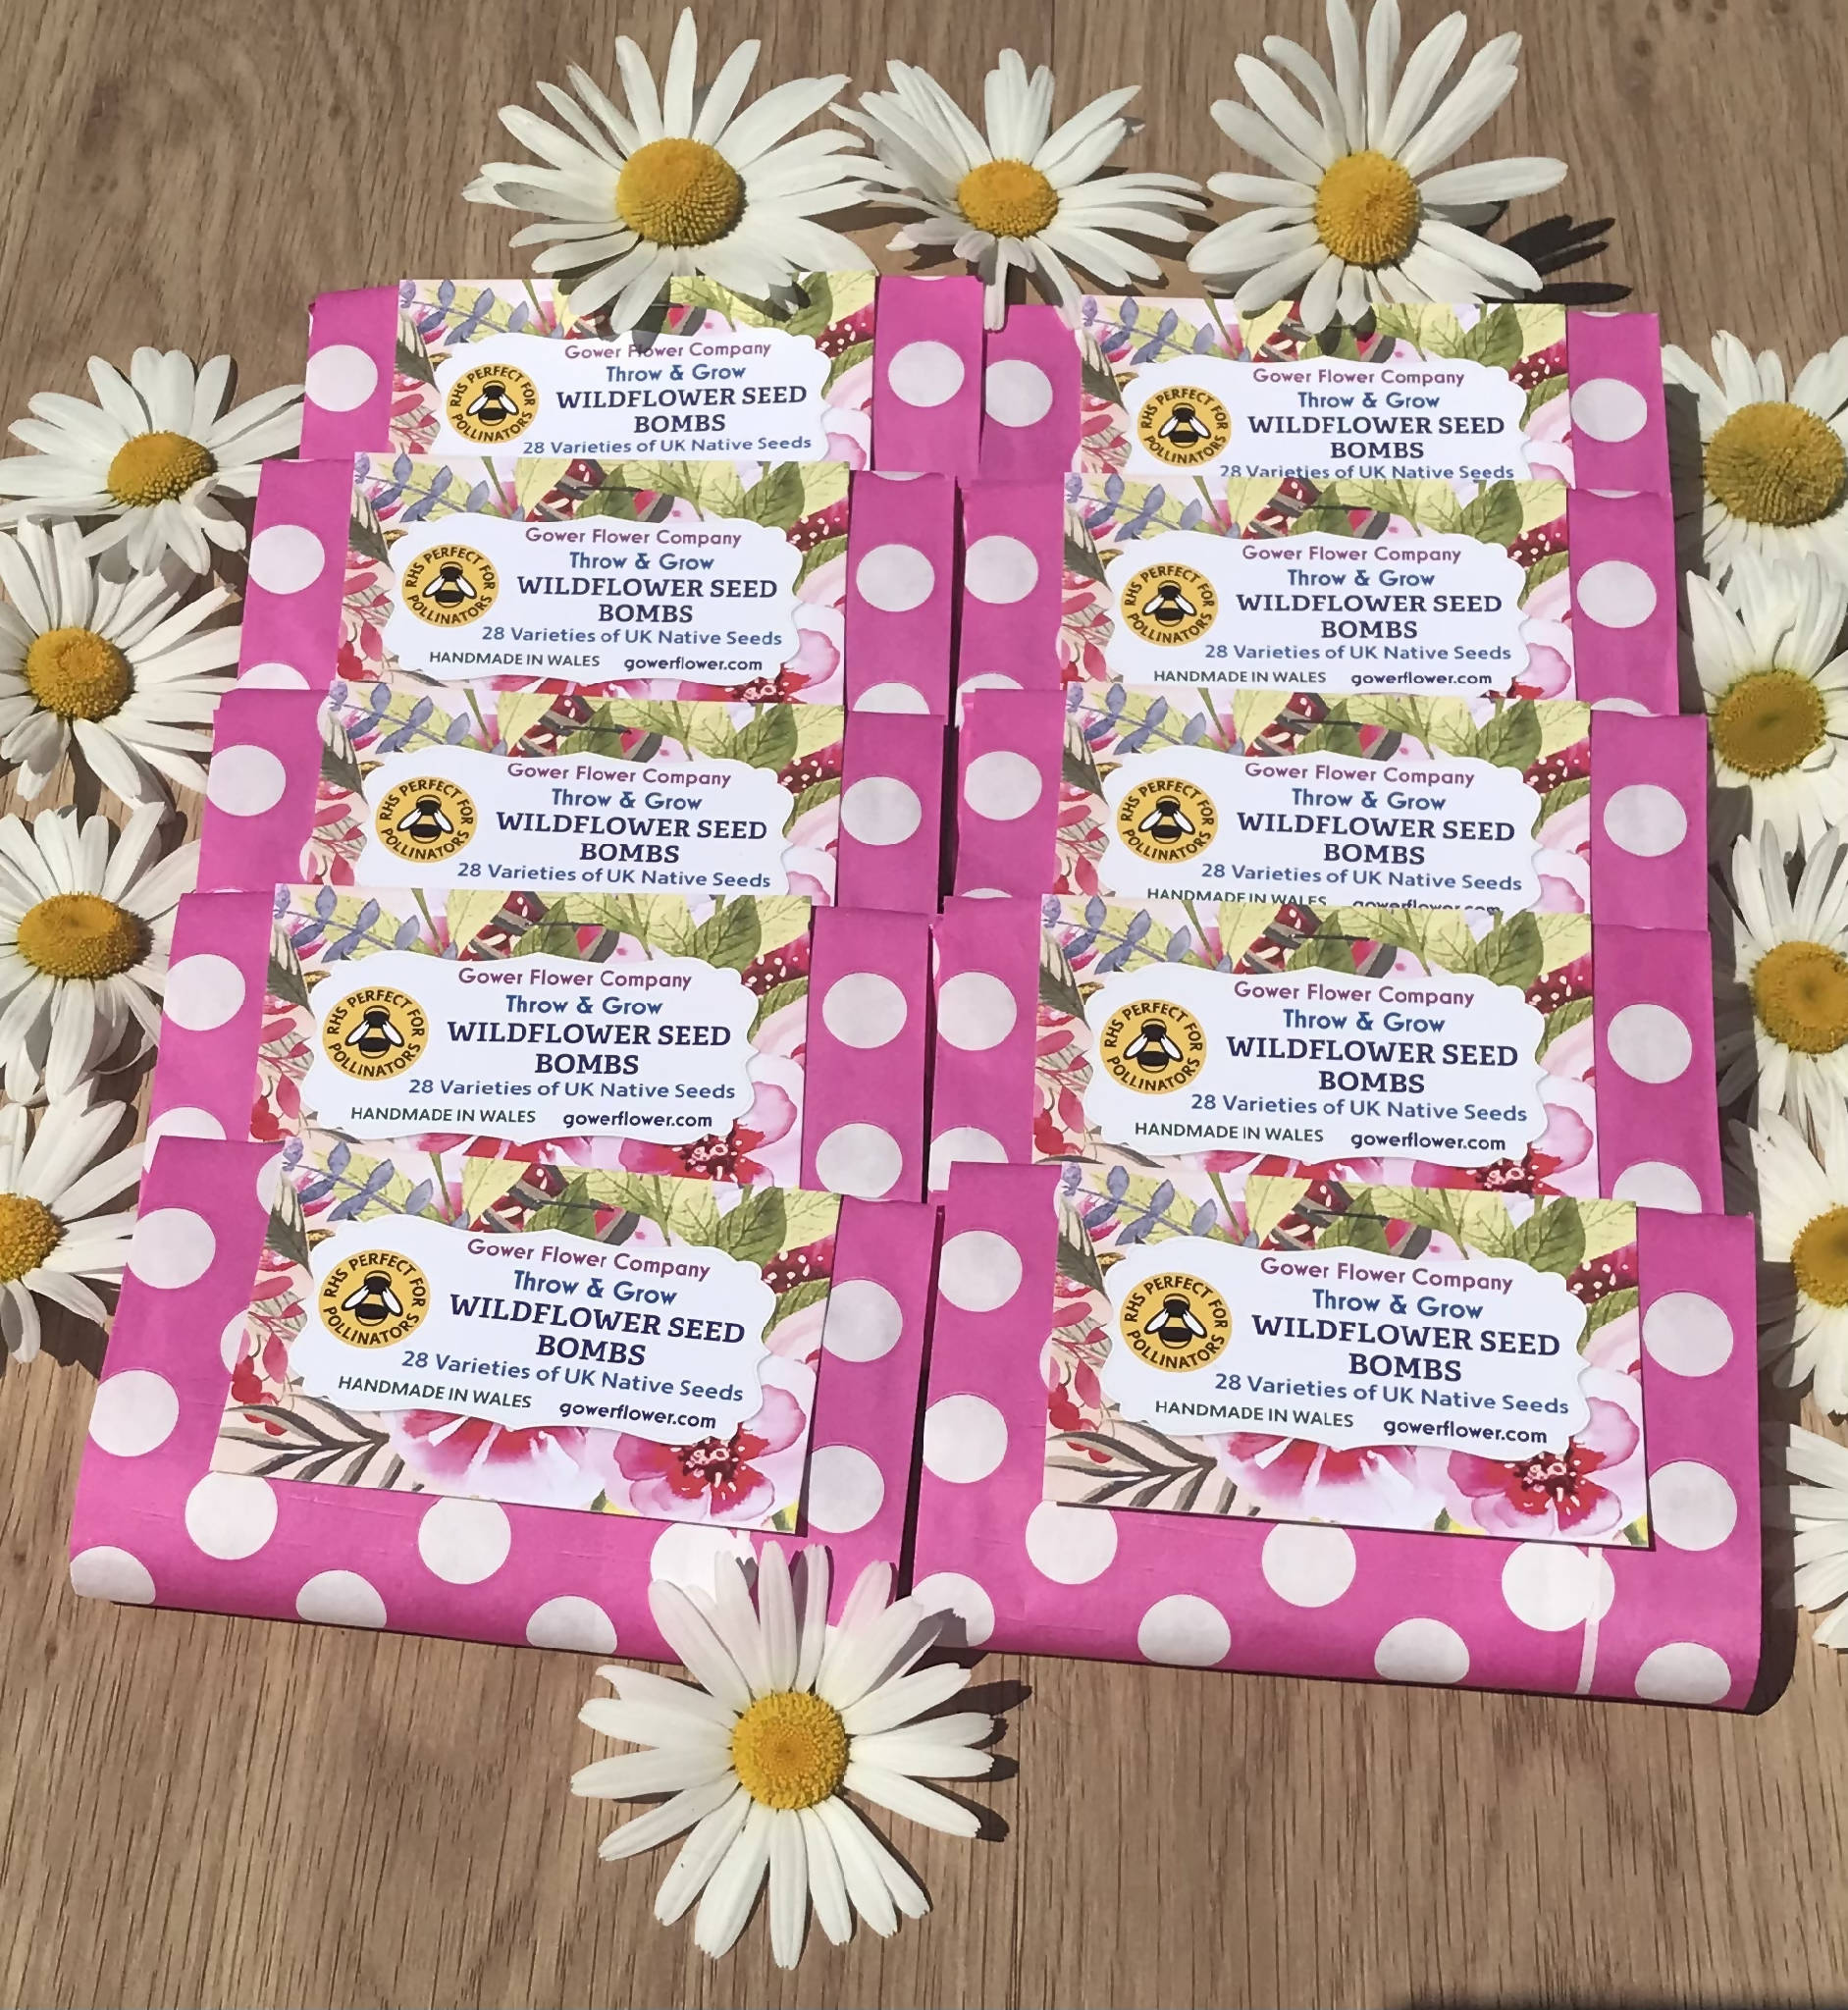 Wildflower Seed Bomb Party Pack - 10 packets each with 4 seed bombs and product card/instructions